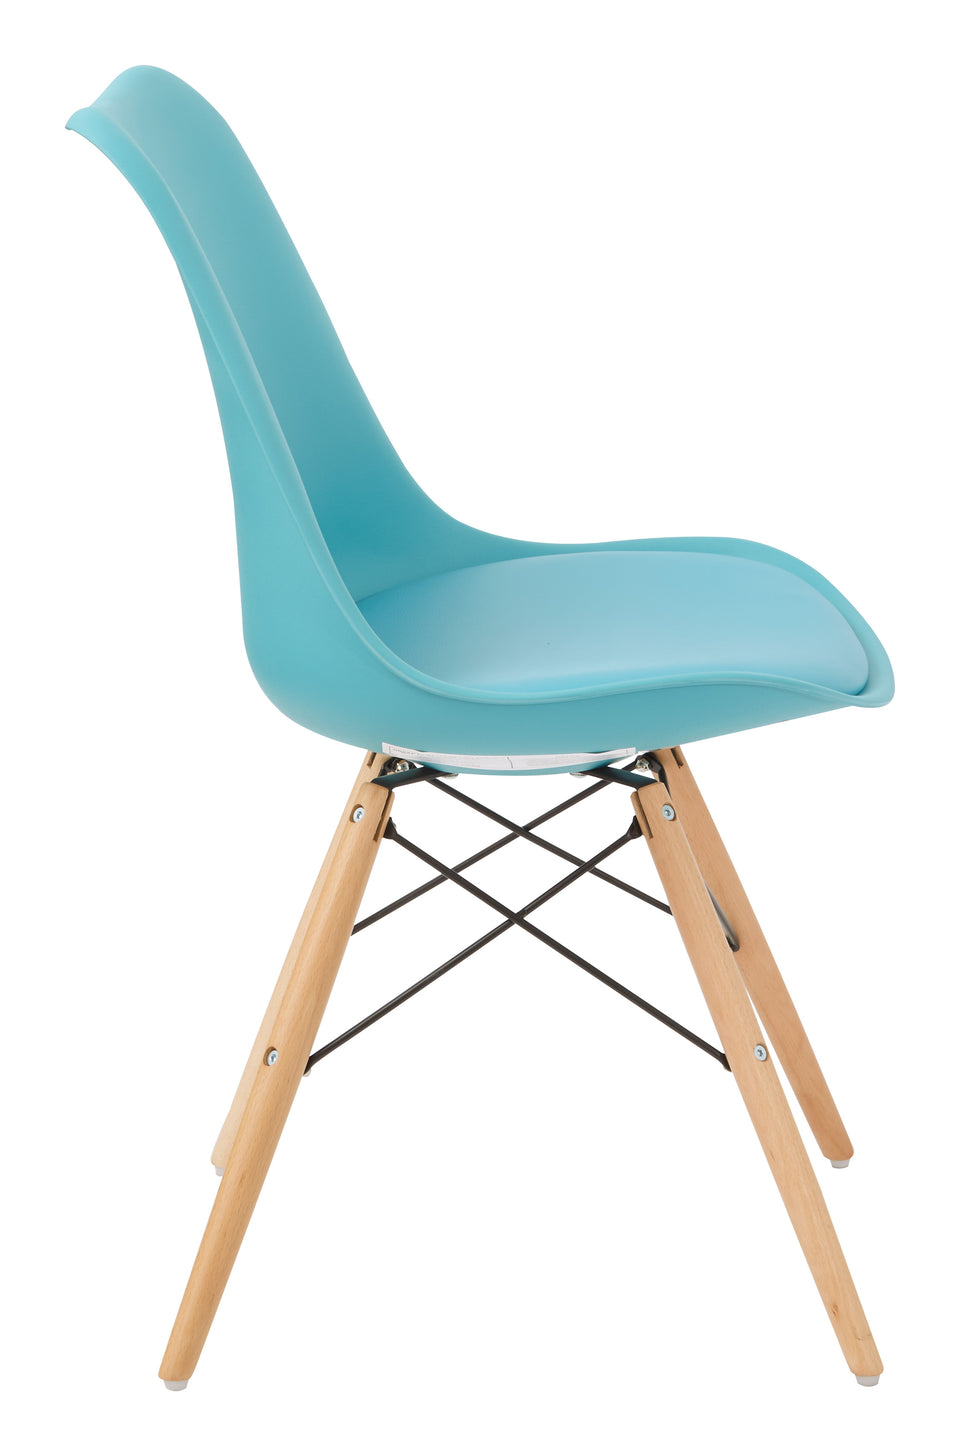 mid century modern aimes blue bucket chair with natural post legs scandinavian design inspired from decurban.com side view